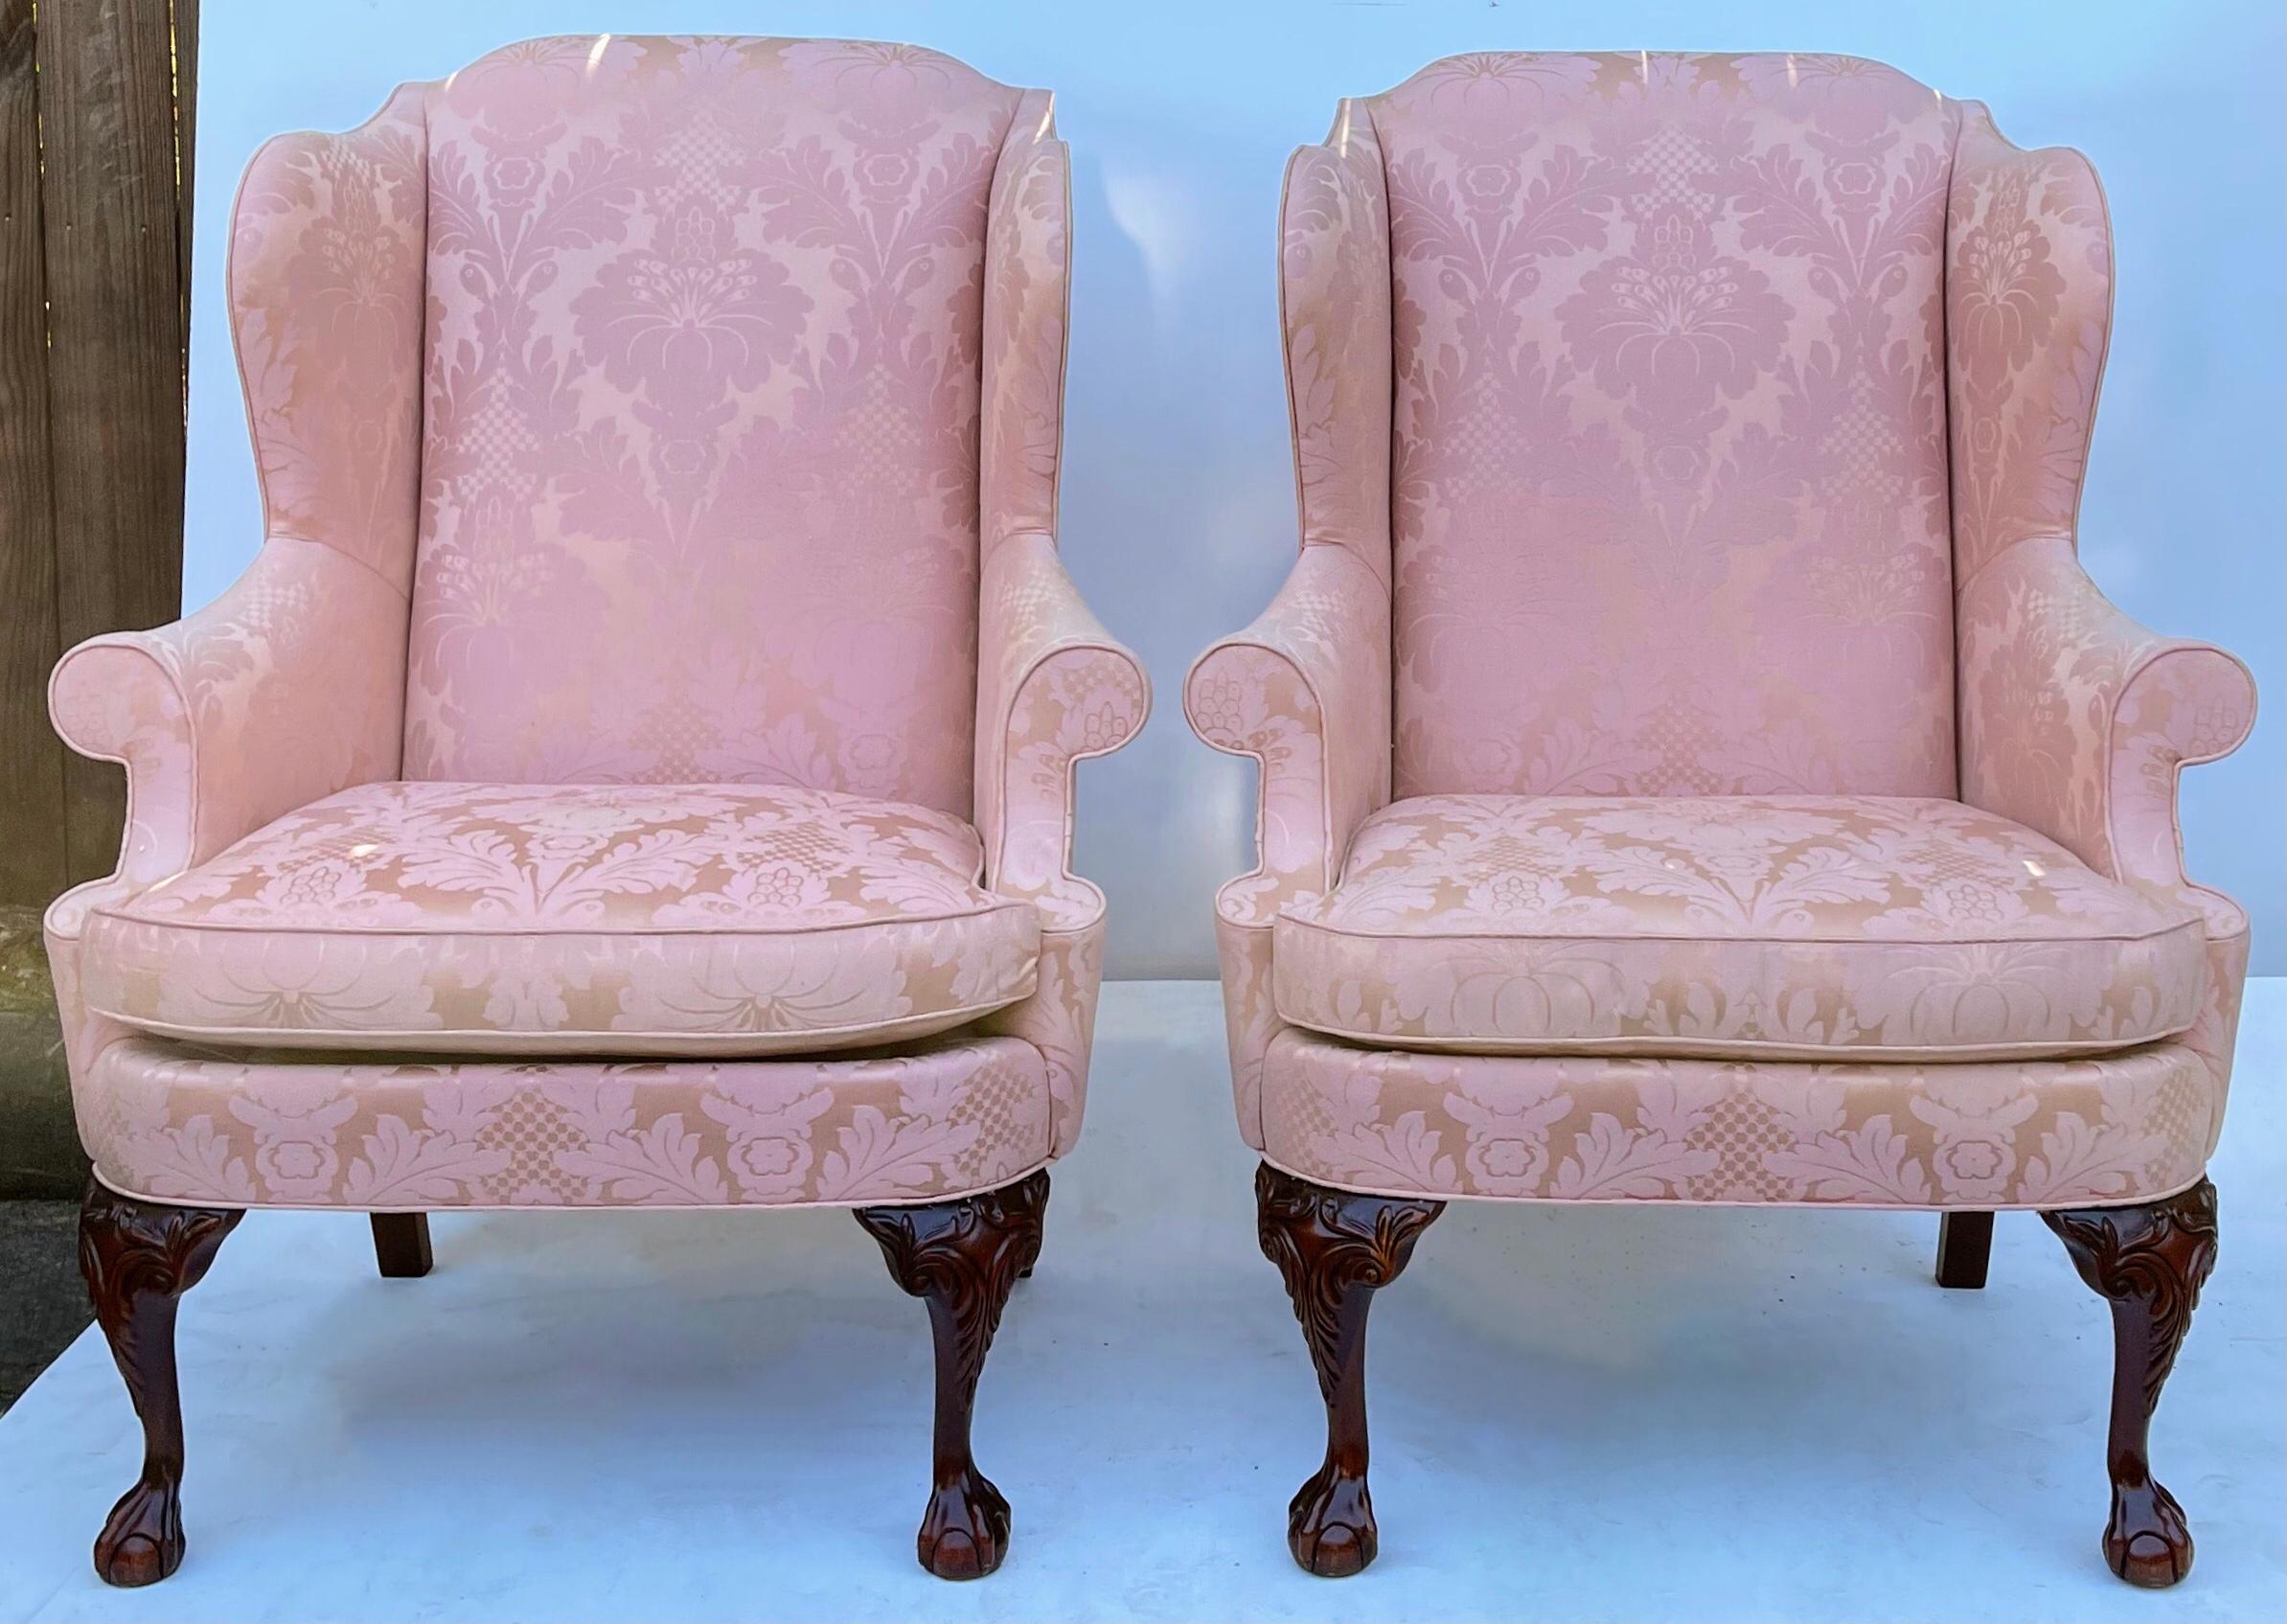 Chinese Chippendale Style Ball and Claw Wingback Chairs by Hickory Chair, Pair 1